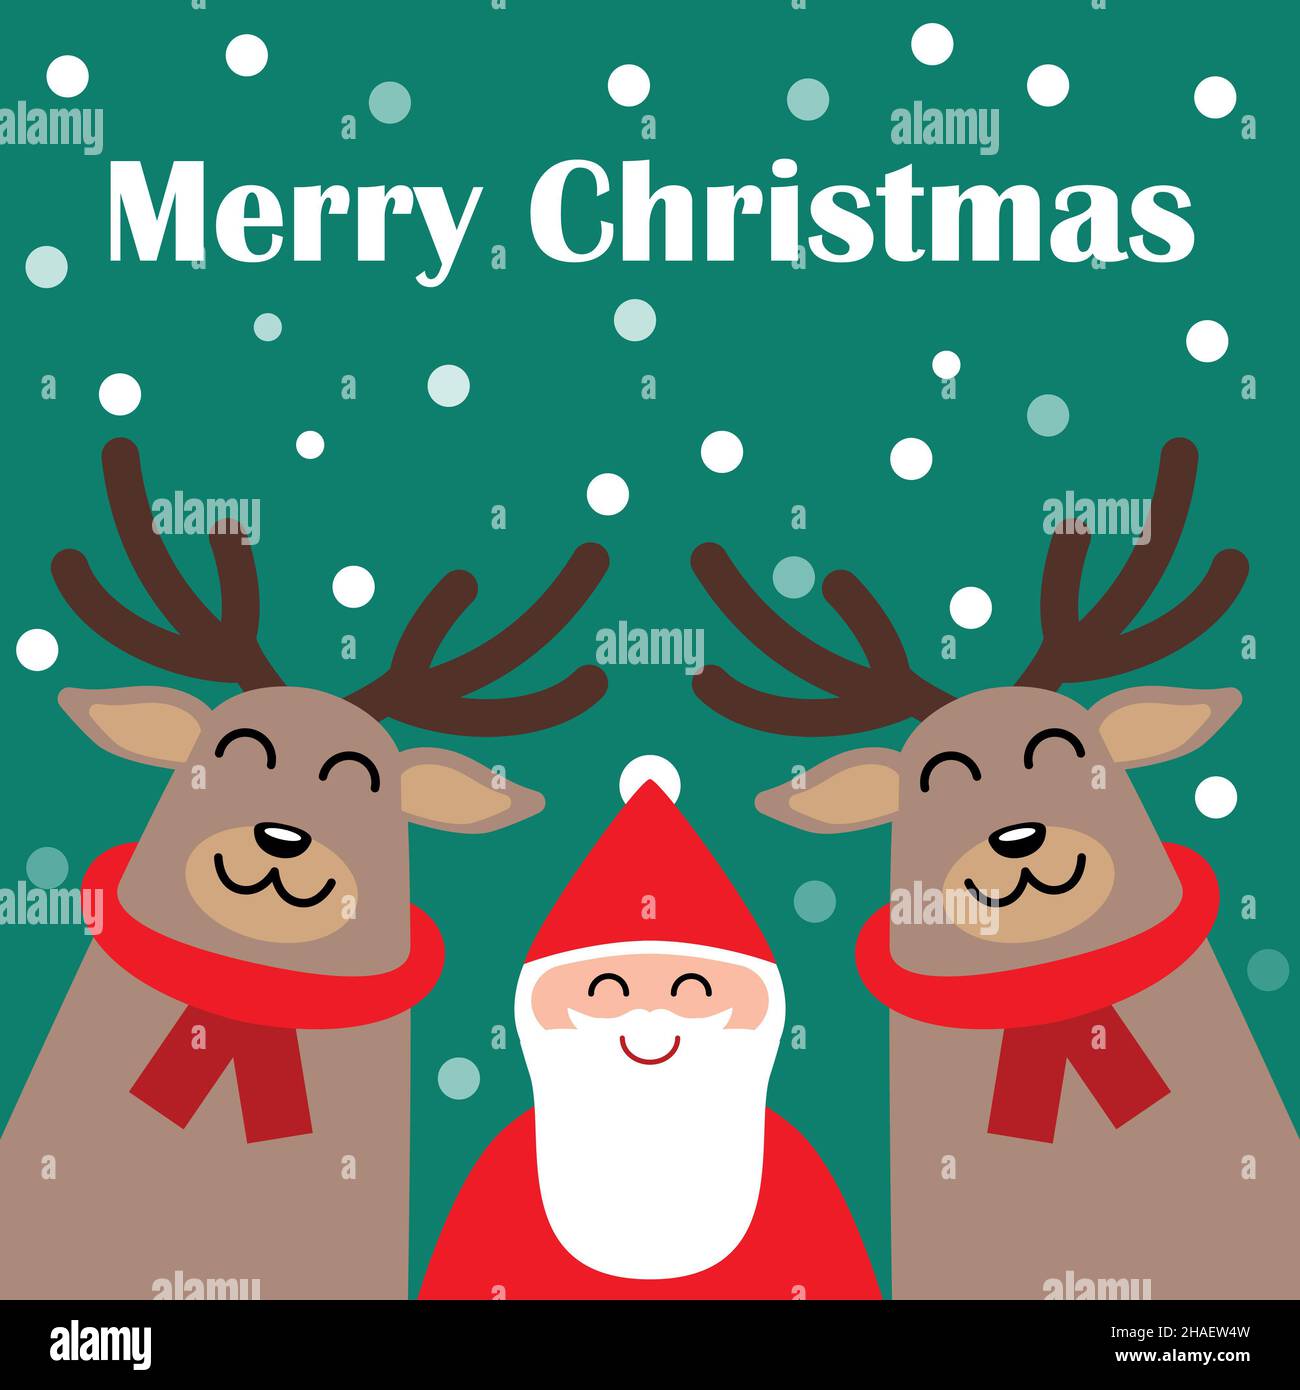 Merry Christmas greeting square card graphic featuring santa claus and reindeer vector illustration. Happy Holiday Stock Photo